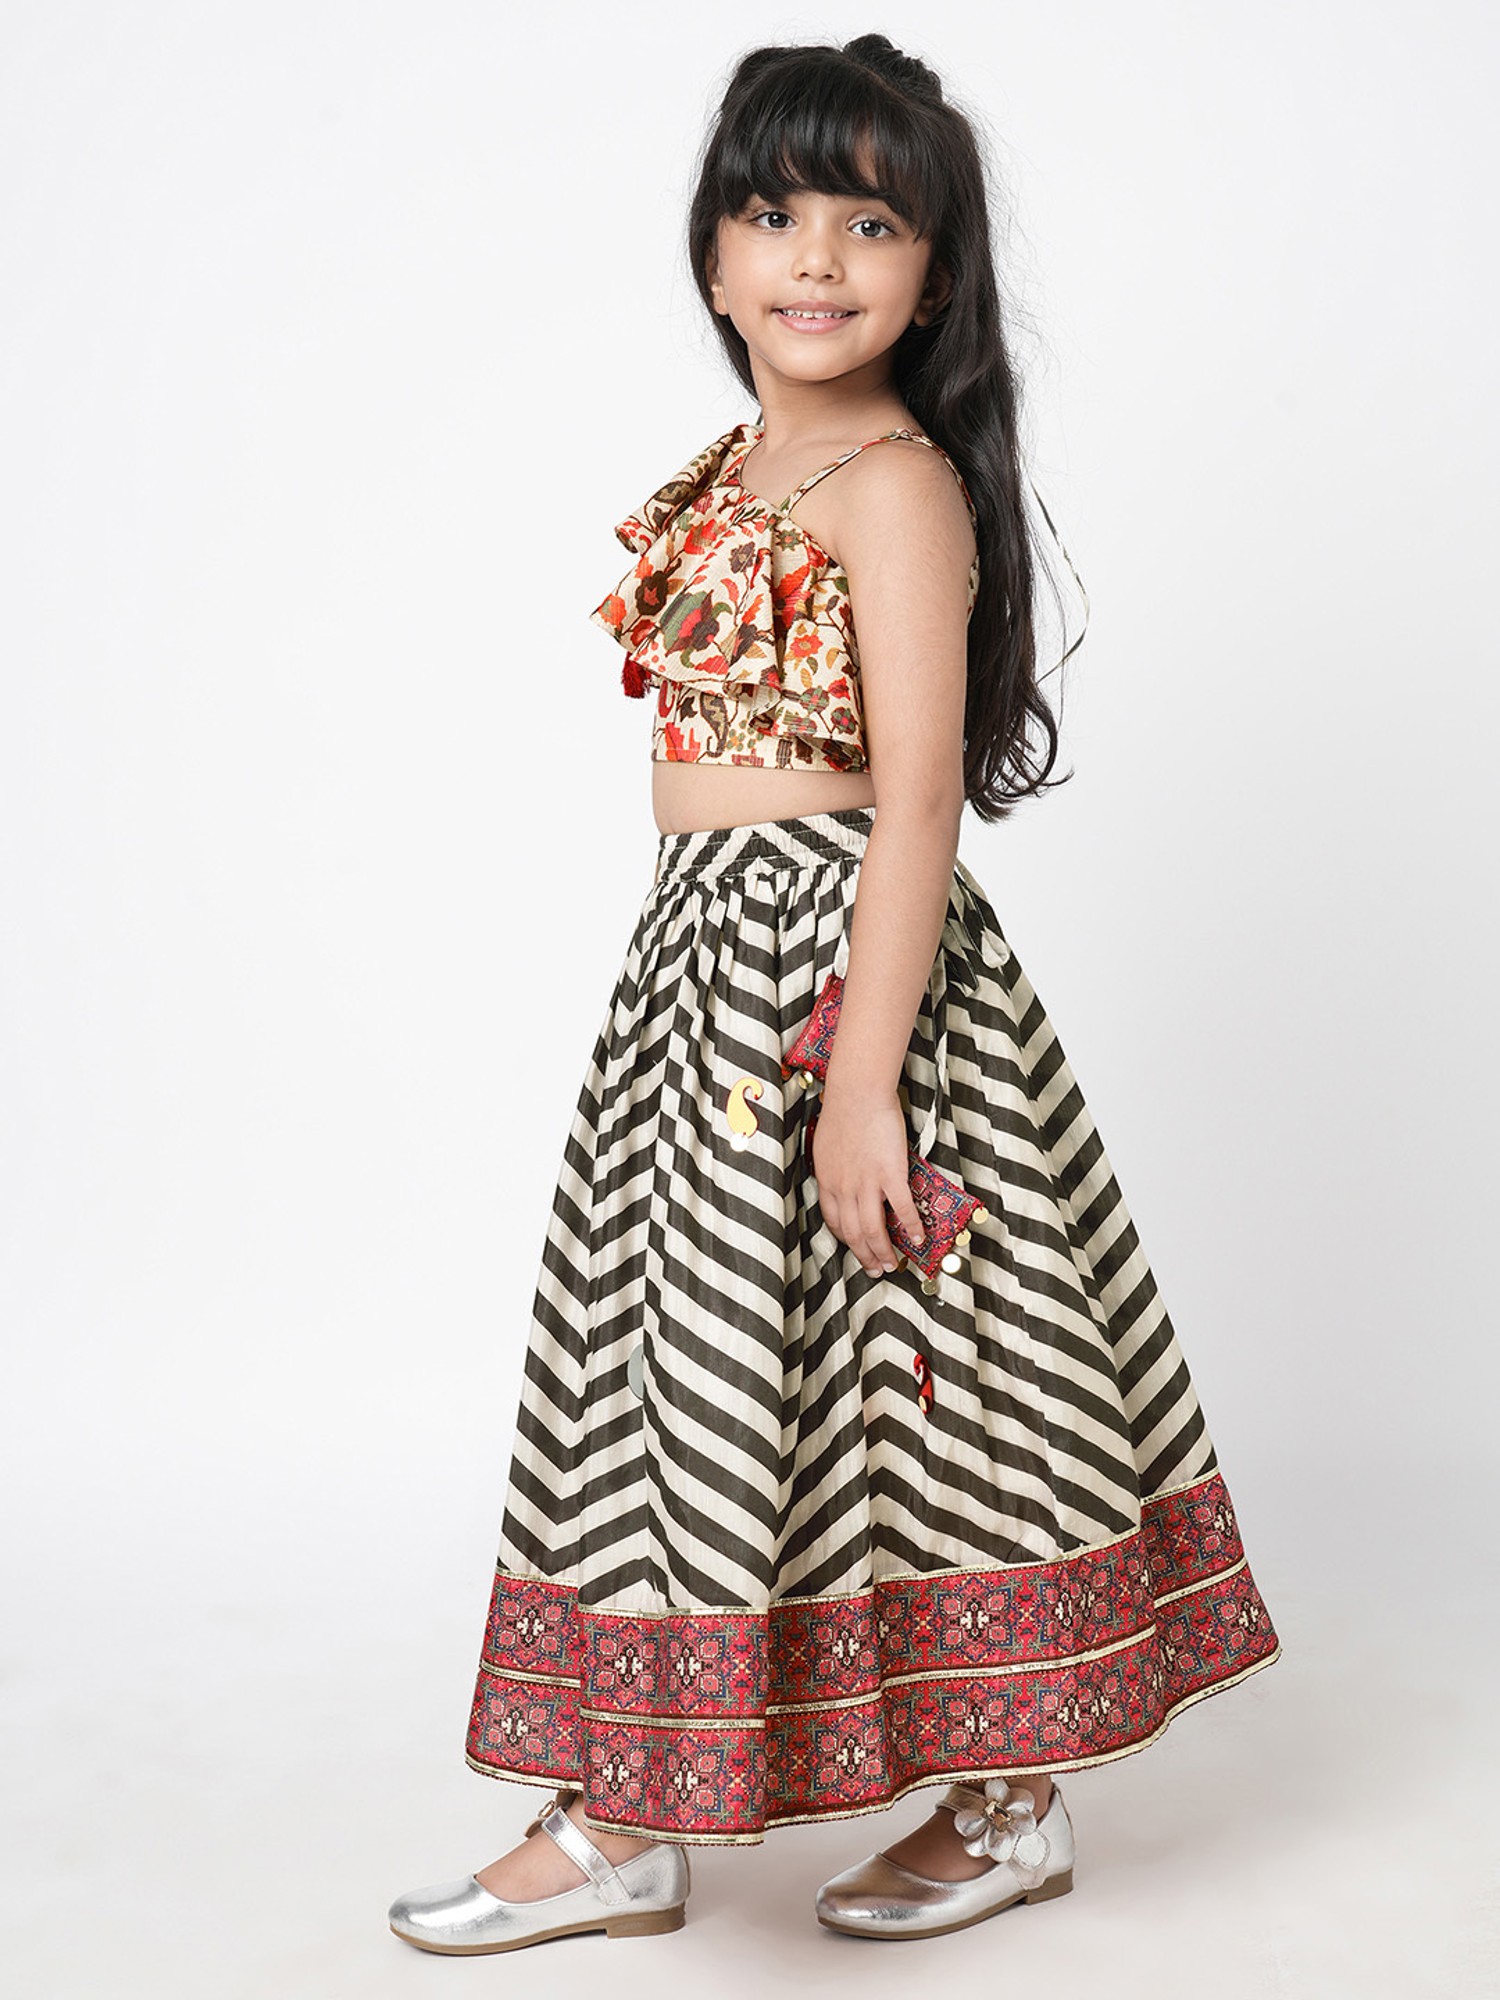 10 Oh So Adorable Lehengas for Your Baby Girl and 5 Tips to Help You Choose  the Perfect One for Her (2020)